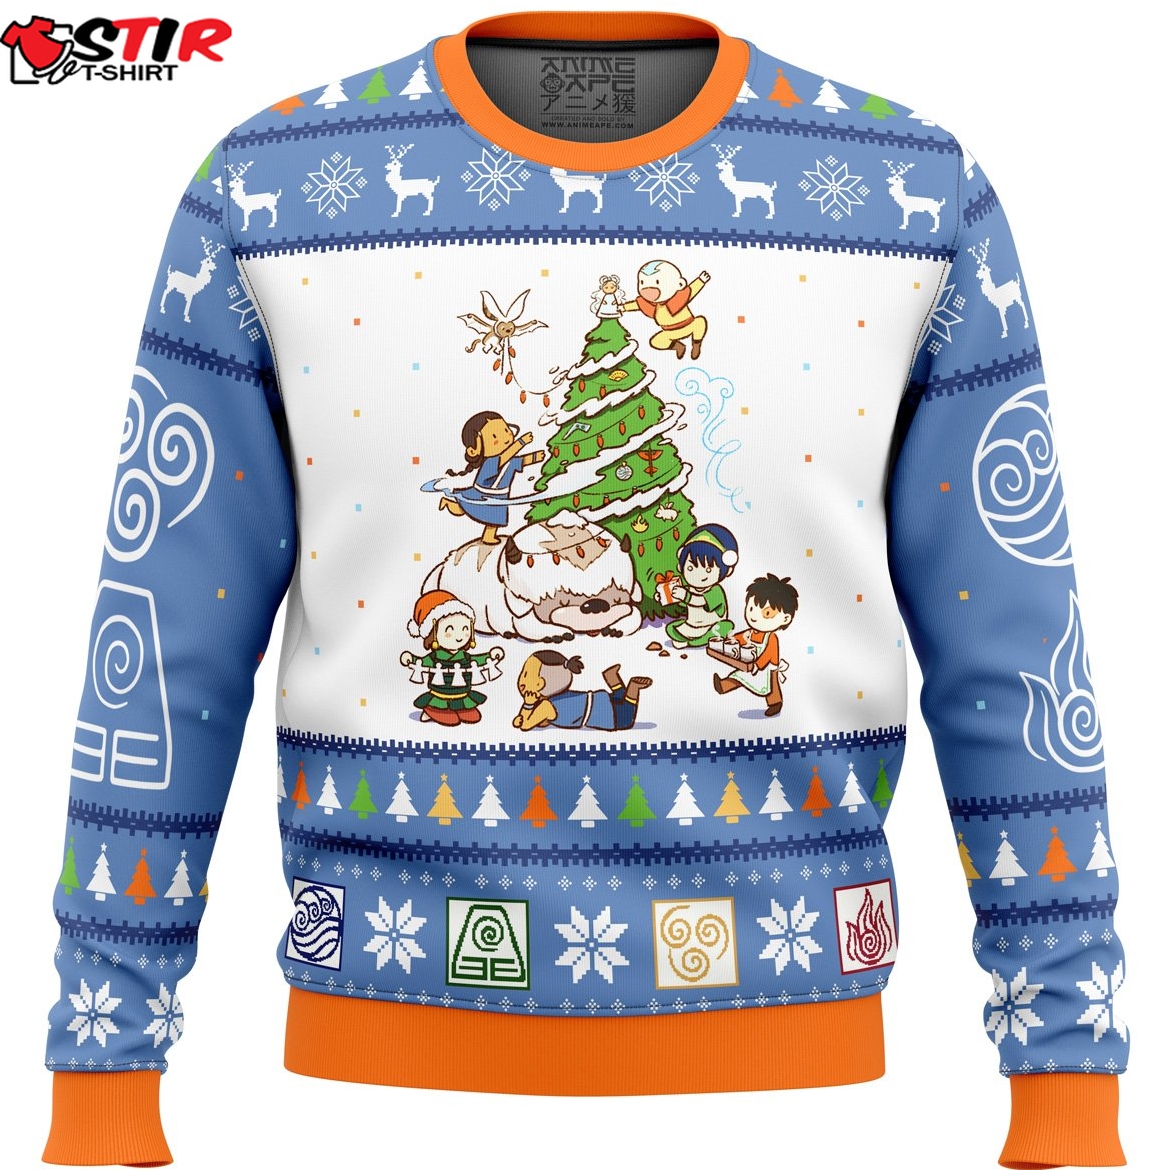 Avatar The Last Airbender Christmas Time Ugly Christmas Sweater Stirtshirt